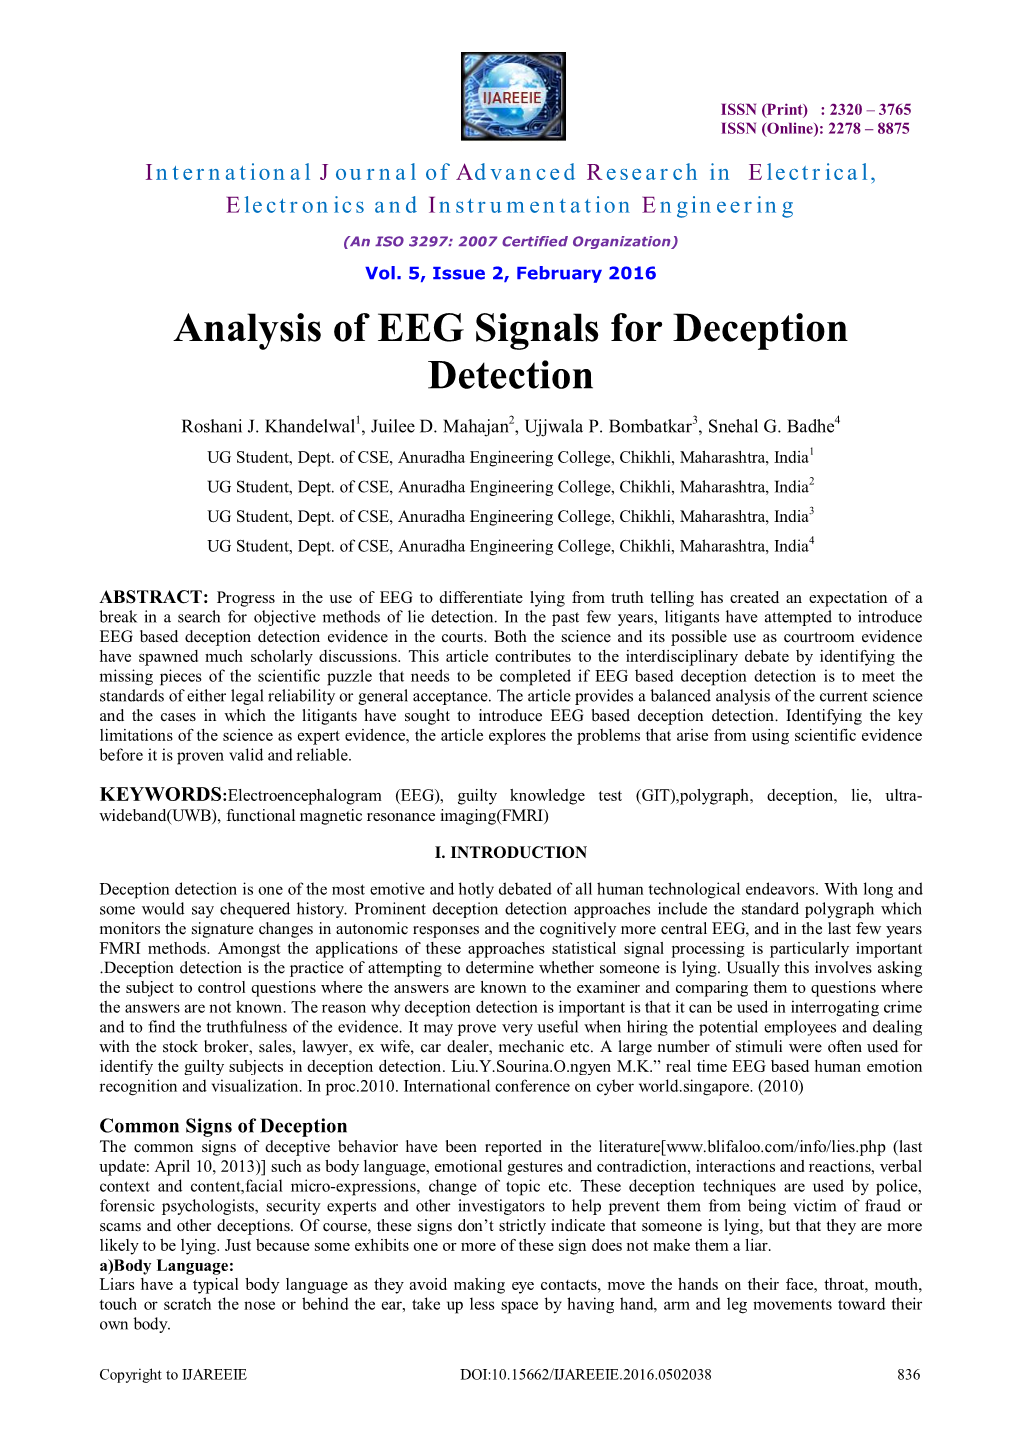 Analysis of EEG Signals for Deception Detection